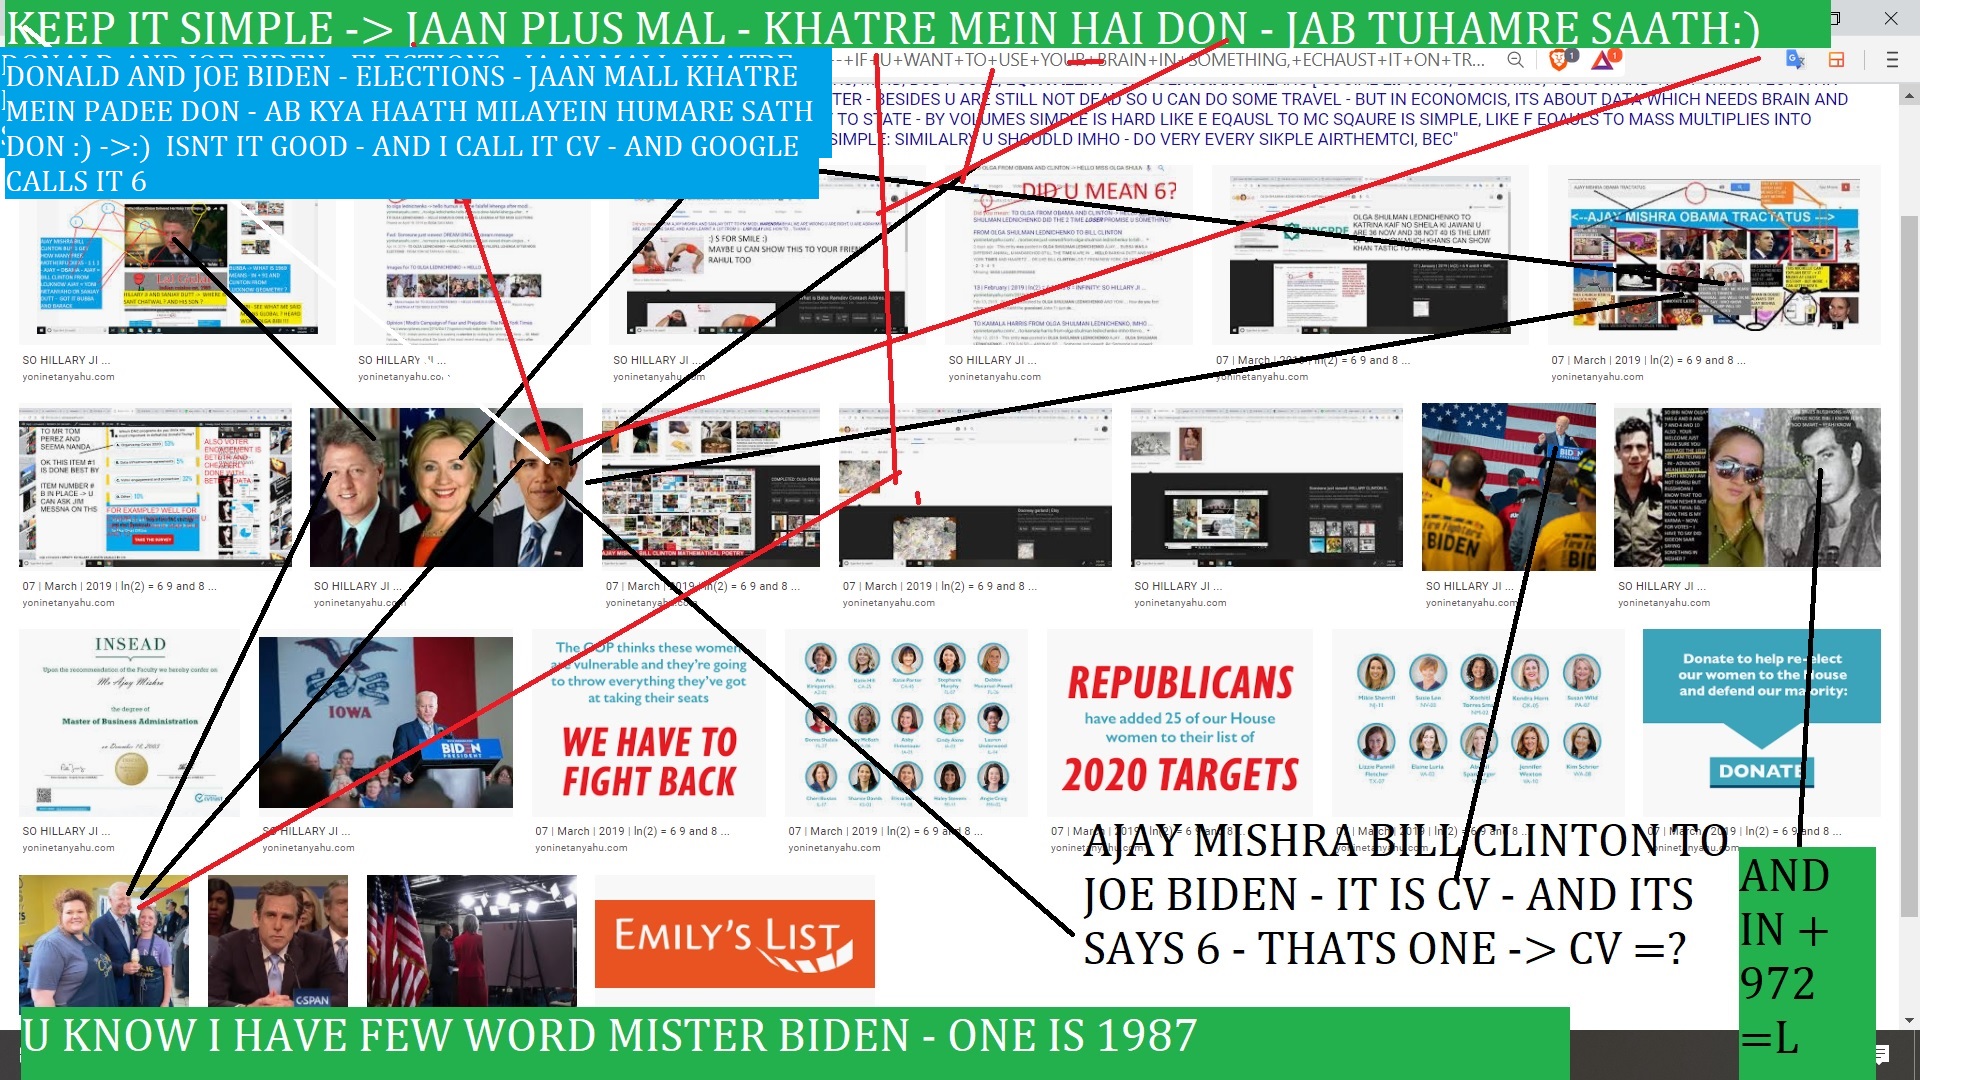 DONALD AND JOE BIDEN - ELECTIONS - JAAN MALL KHATRE MEIN PADEE DON - AB KYA HAATH MILAYEIN HUMARE SATH DON ISNT IT GOOD - AND I CALL IT CV - AND GOOGLE CALLS IT 6